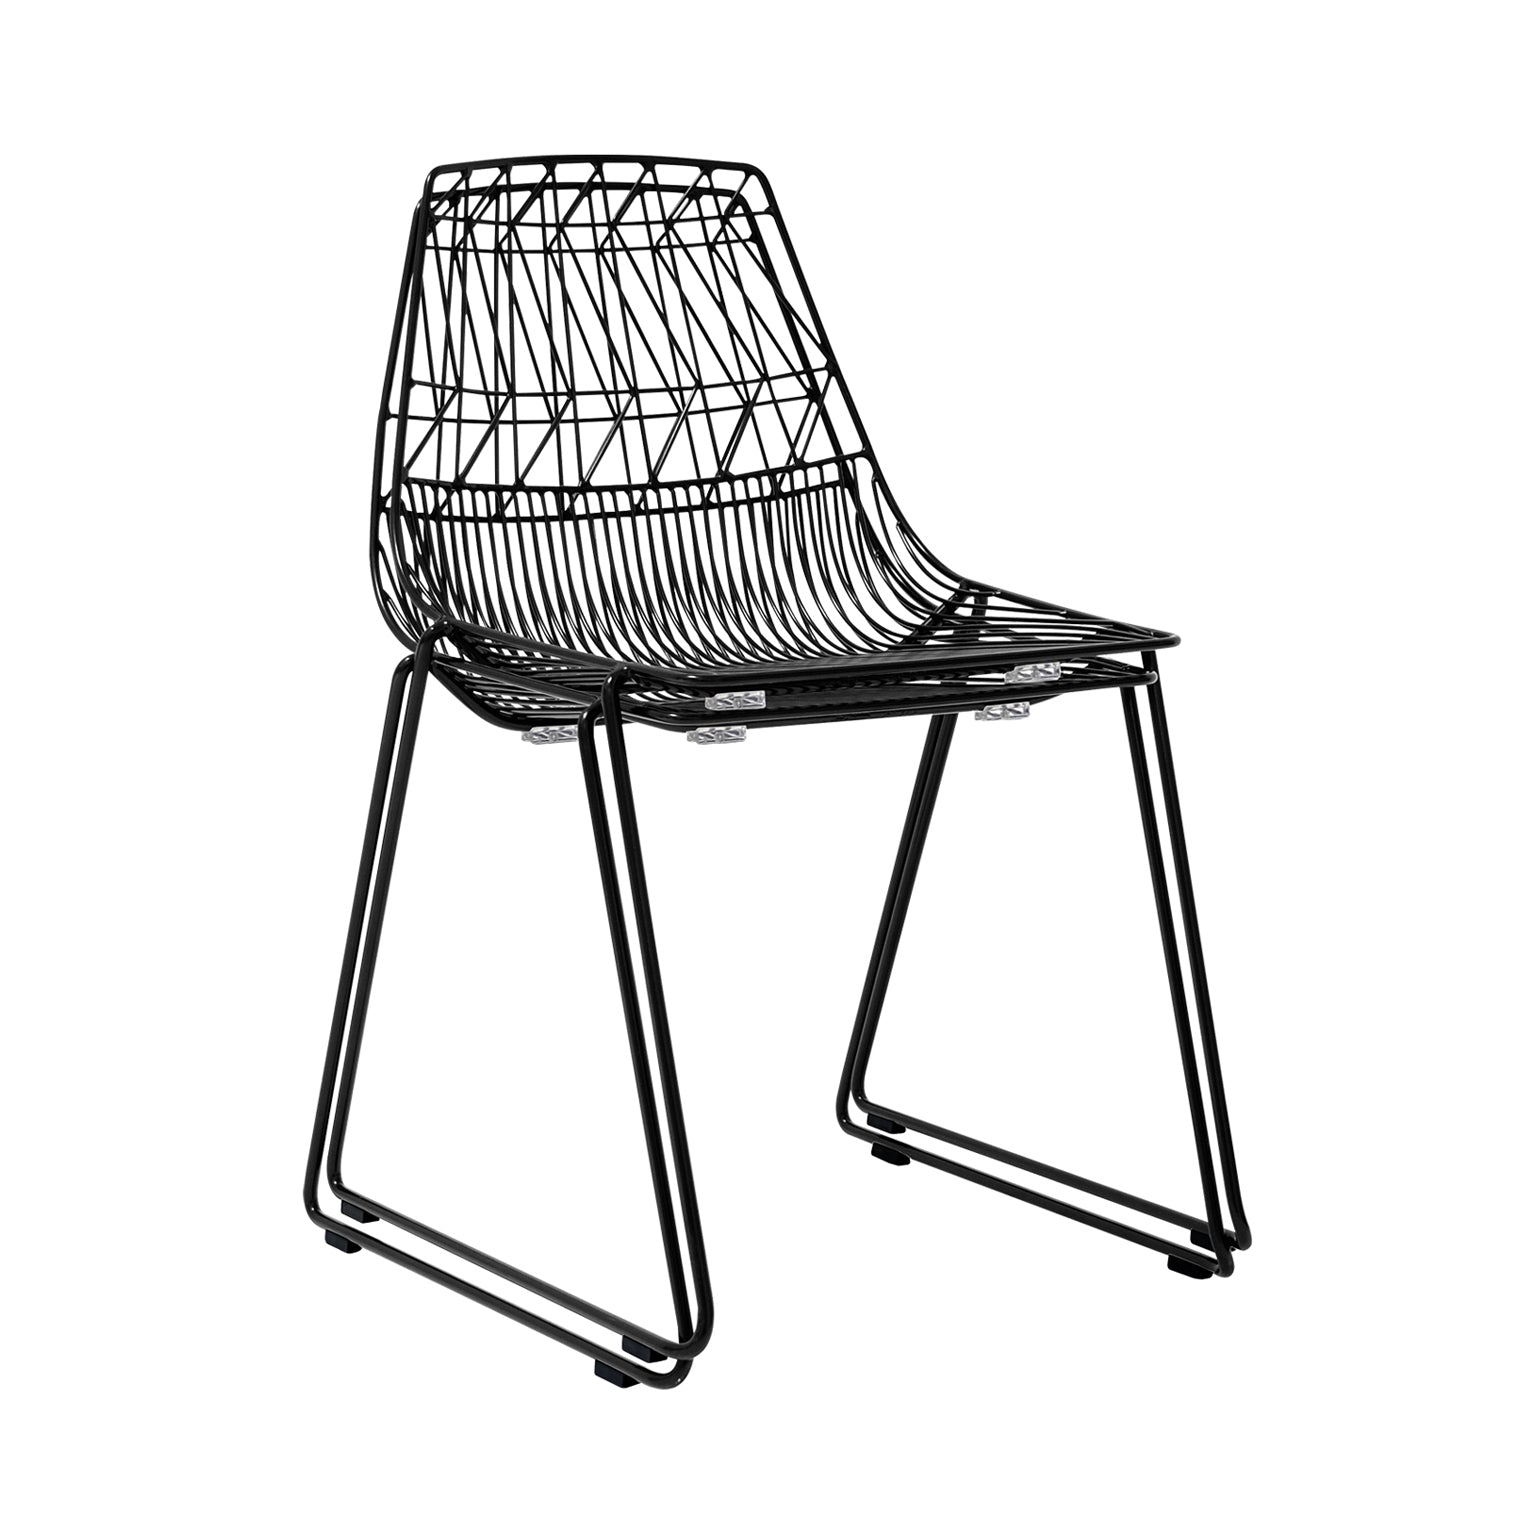 Lucy Stacking Chair: Color + Black + Without Seat Pad